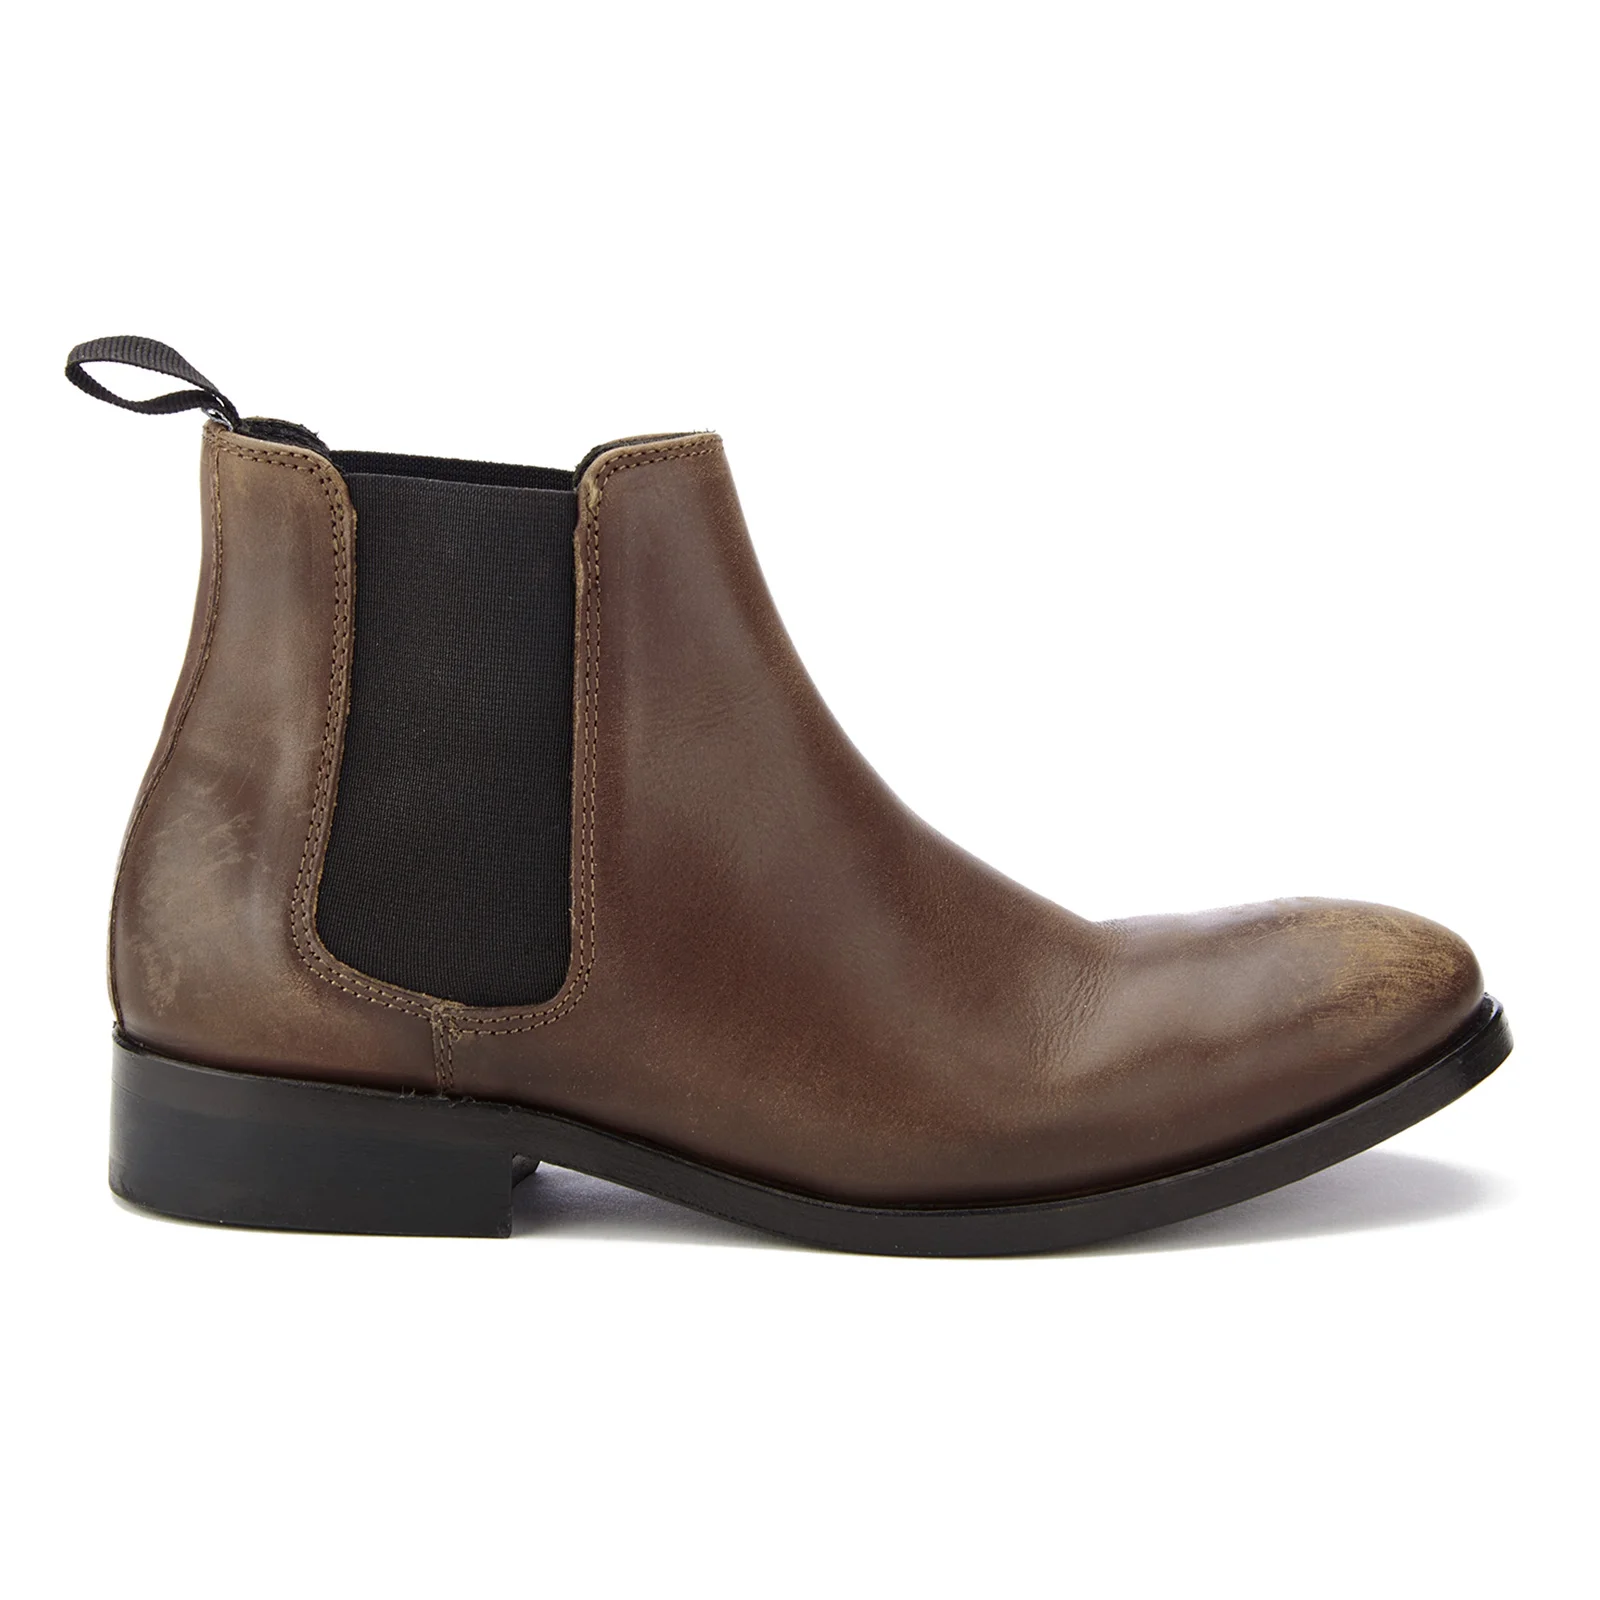 PS by Paul Smith Women's Lydon Leather Chelsea Boots - Brown Image 1